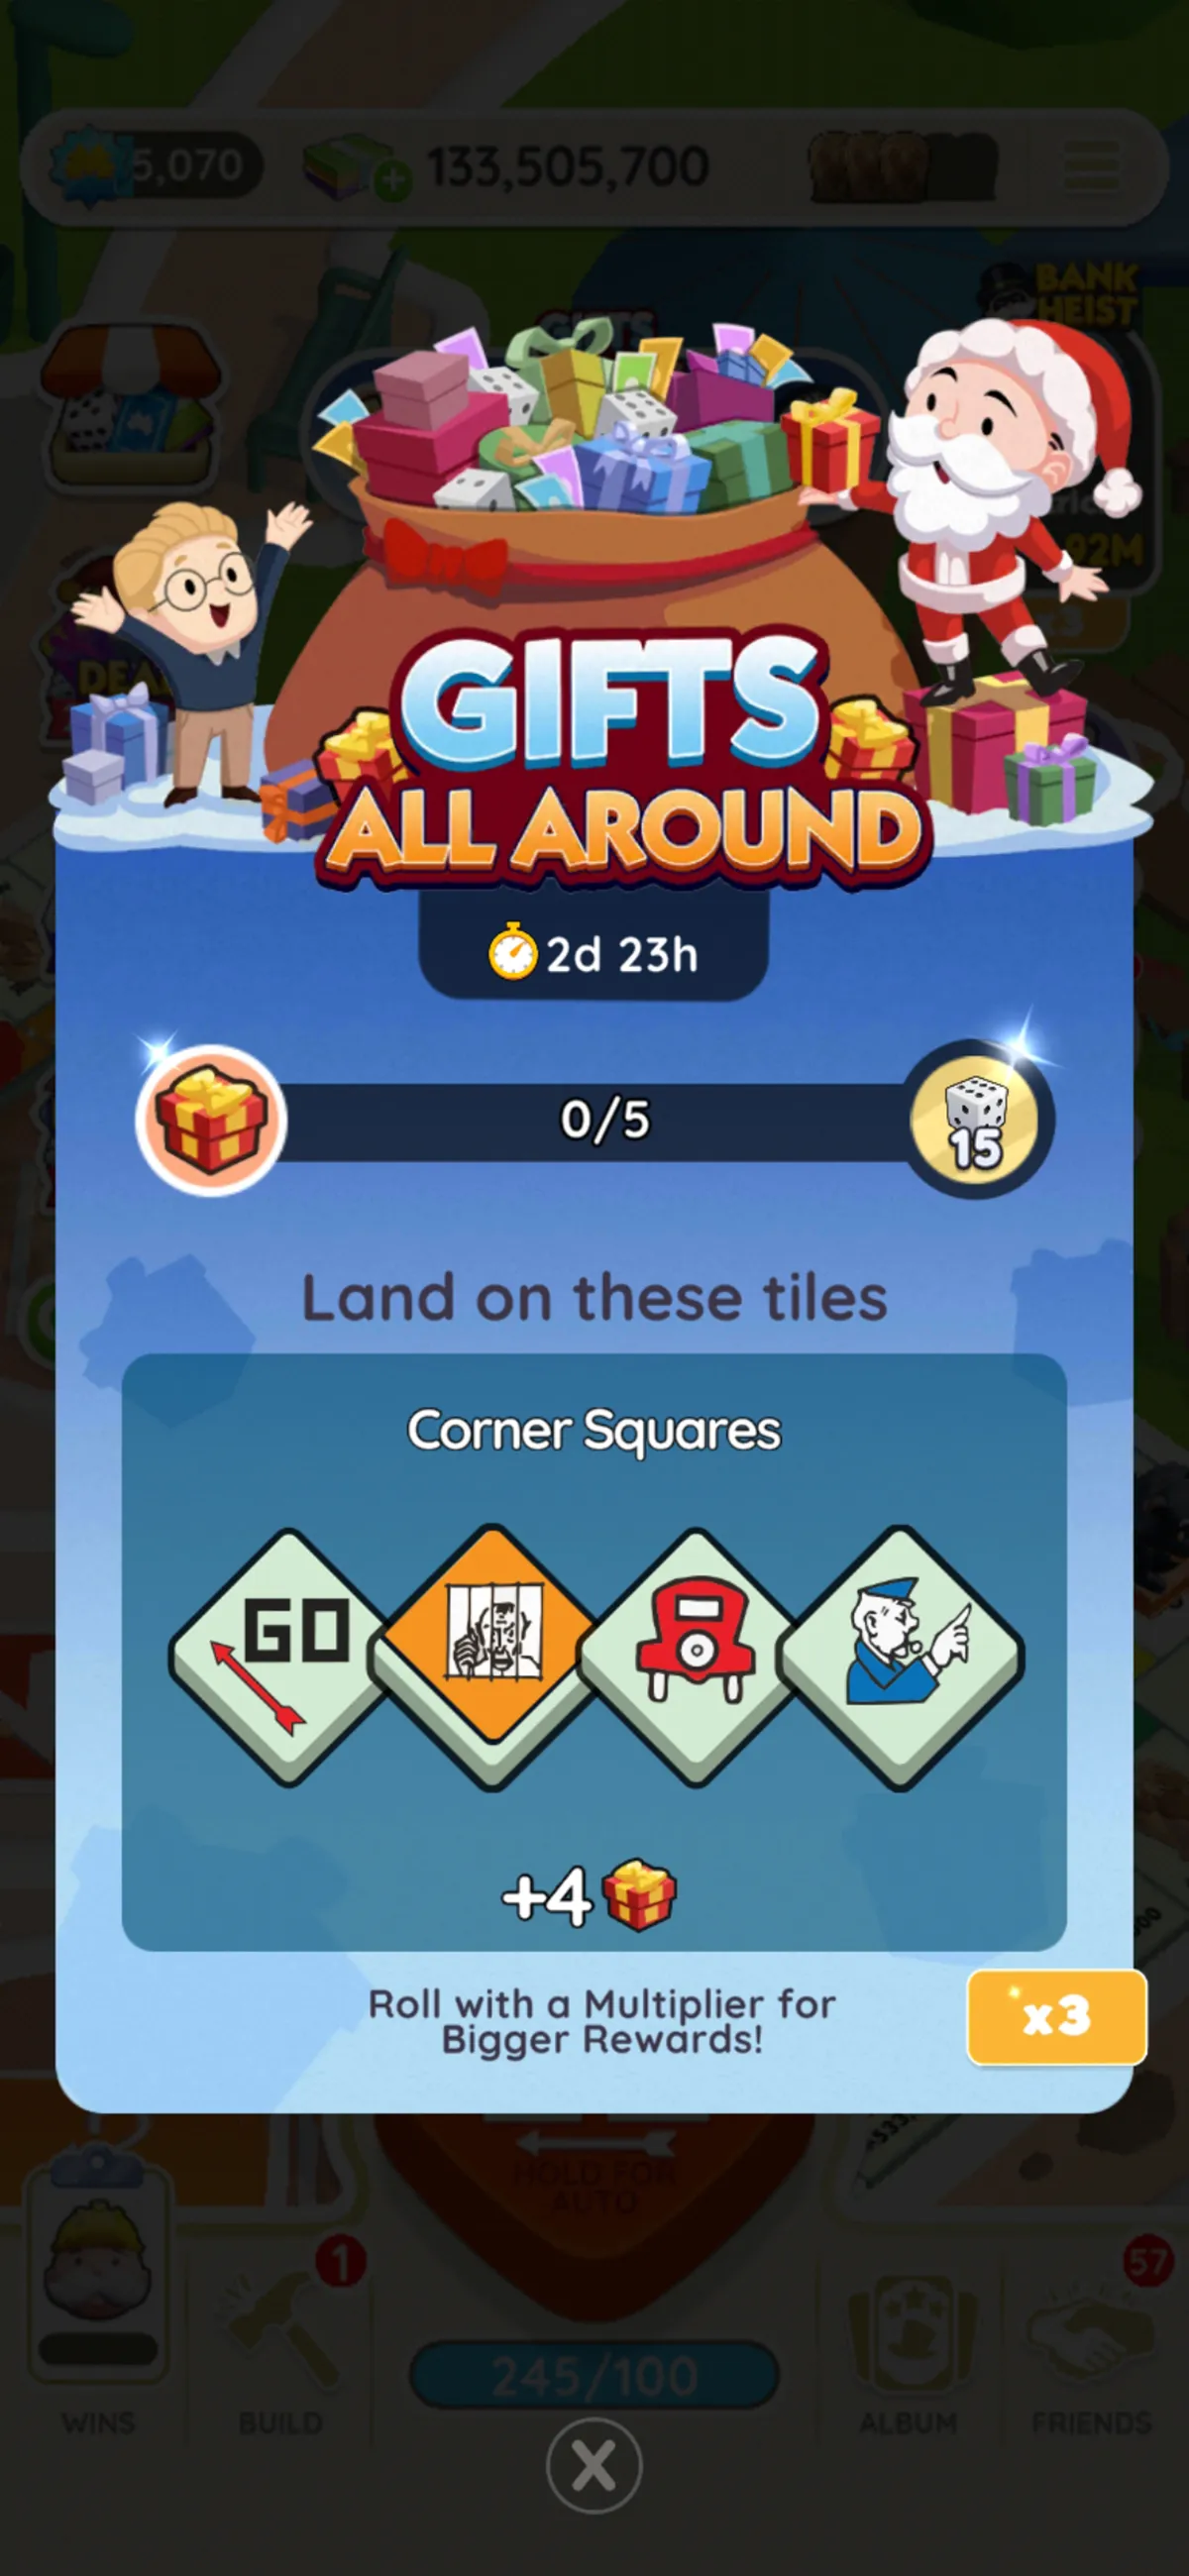 A full-sized image for the Gifts All Around event in Monopoly GO showing Mr. Monopoly taking a gift out of a giant bag full of presents while a child looks on. The image is part of all the rewards and milestones you can get for the Gifts All Around event in Monopoly Go as well as tips and tricks for how to play.